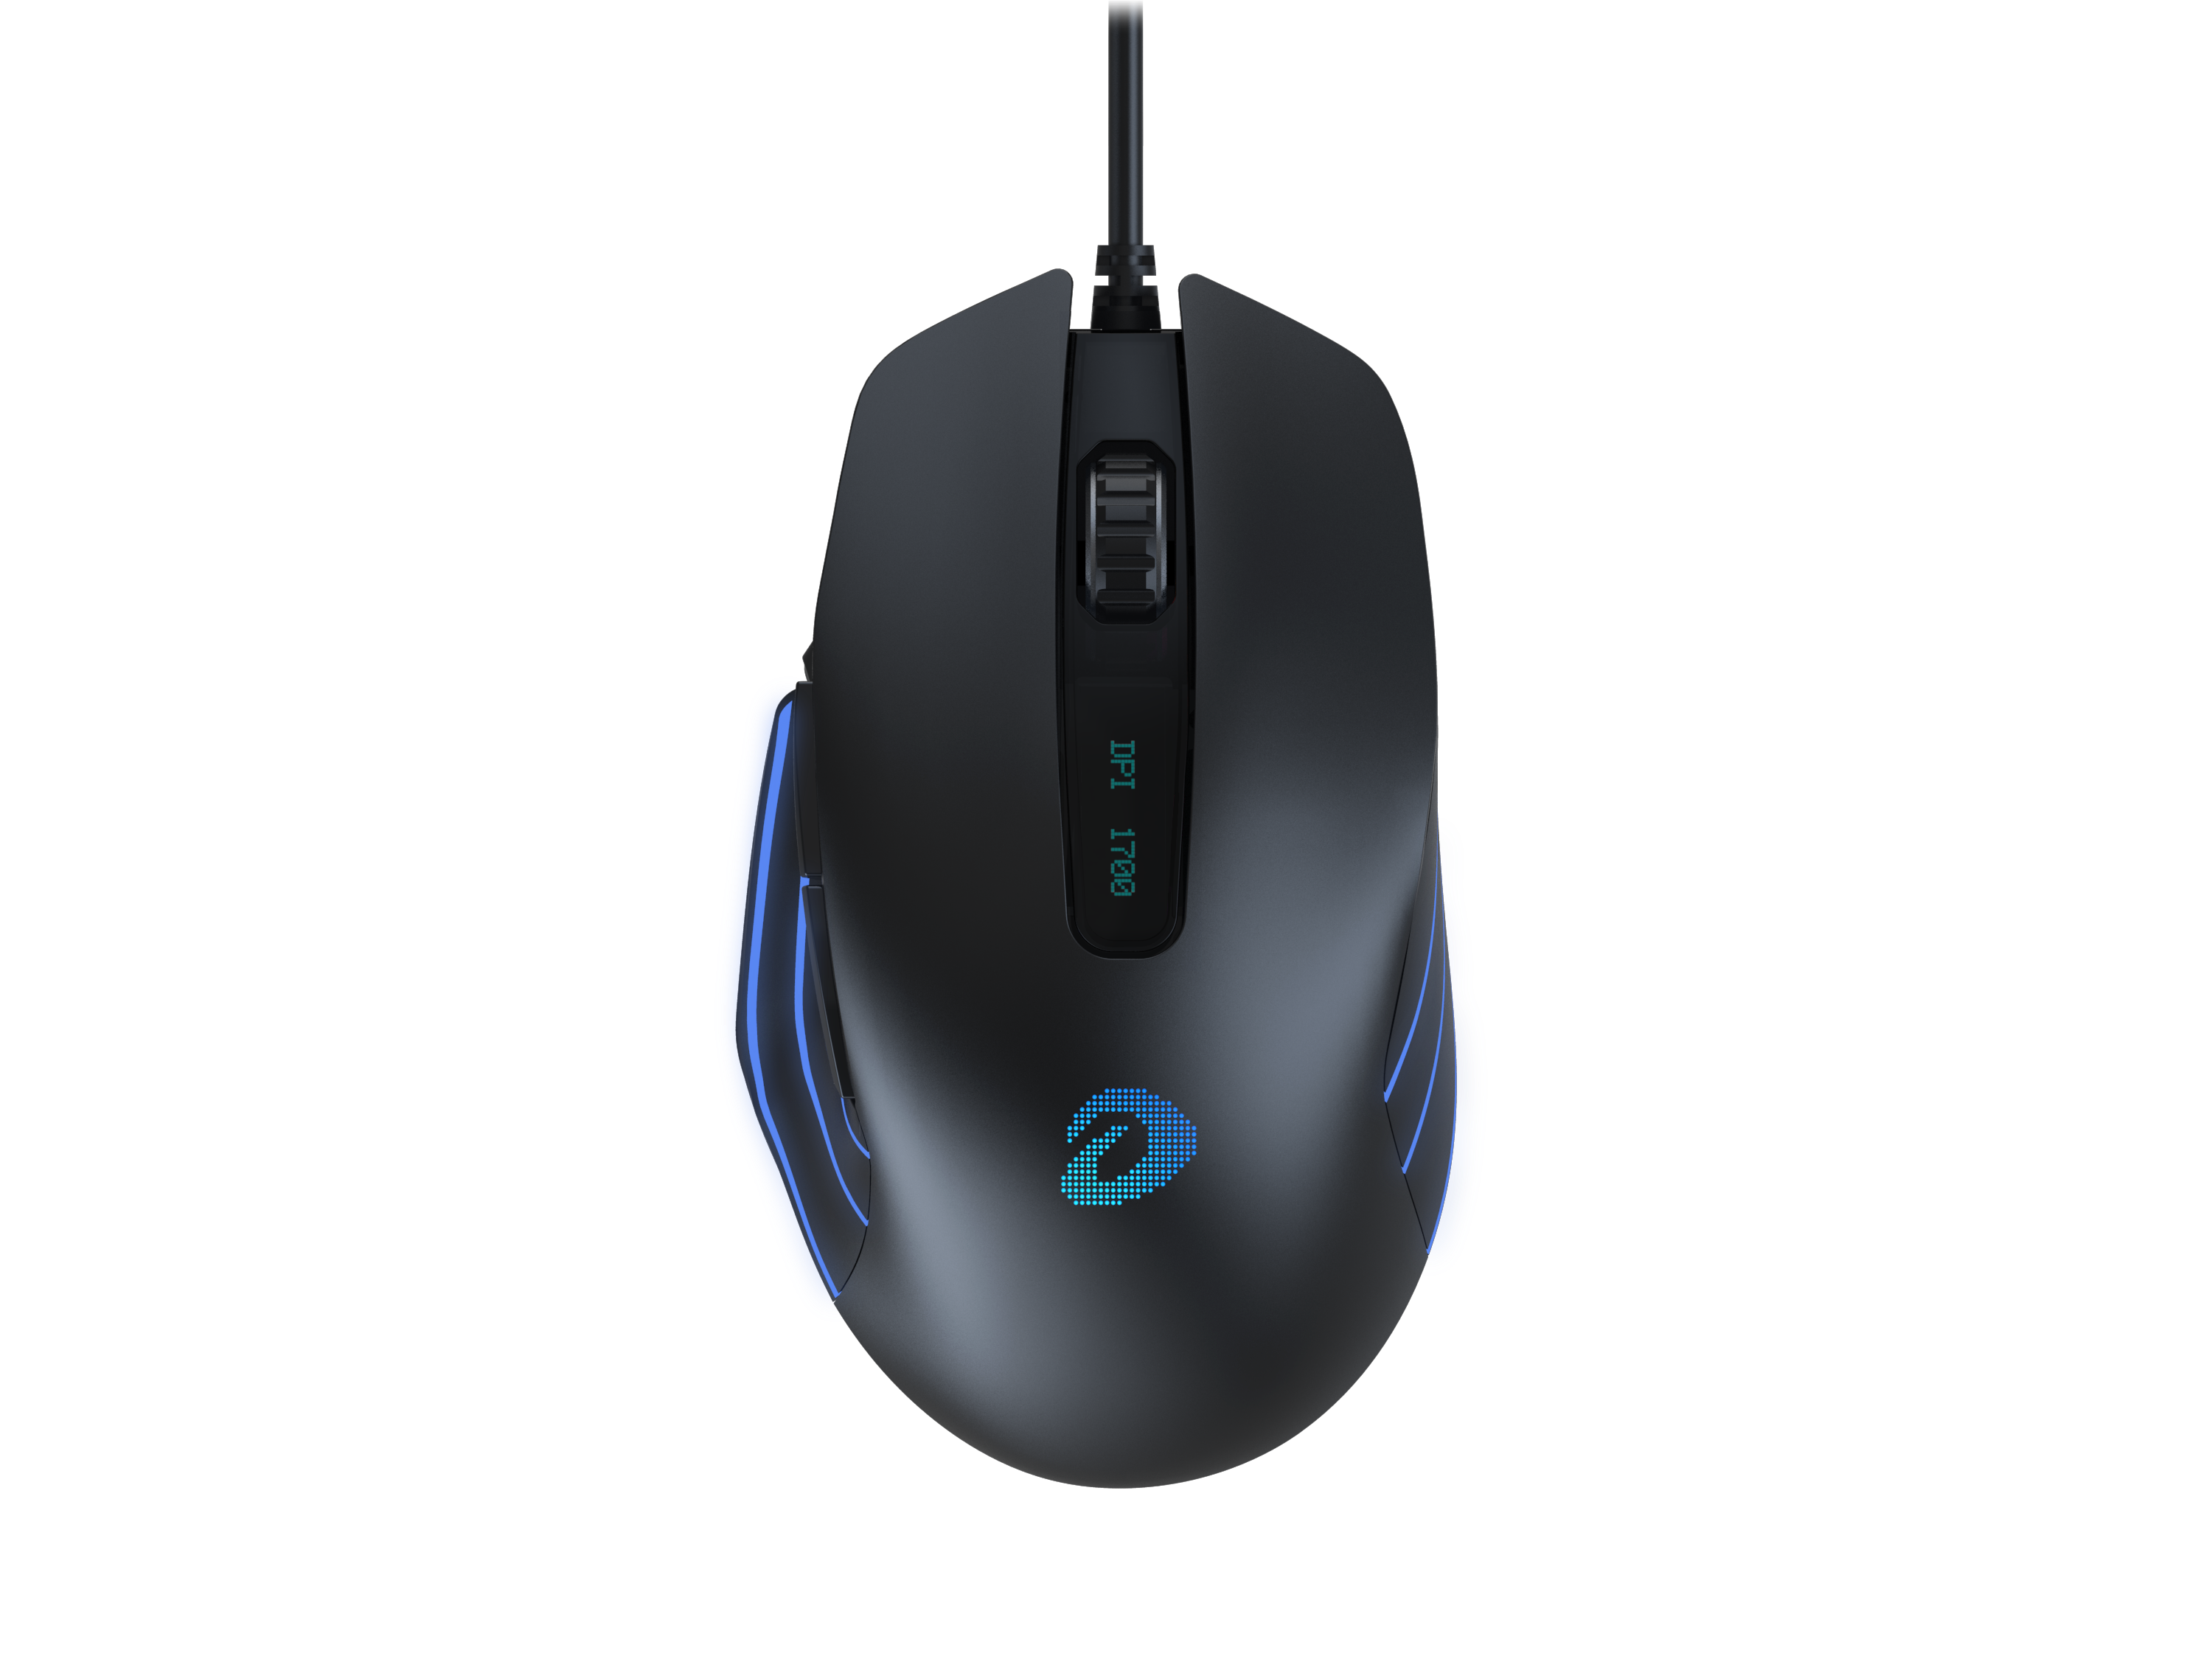 TM229 gaming mouse with 3337